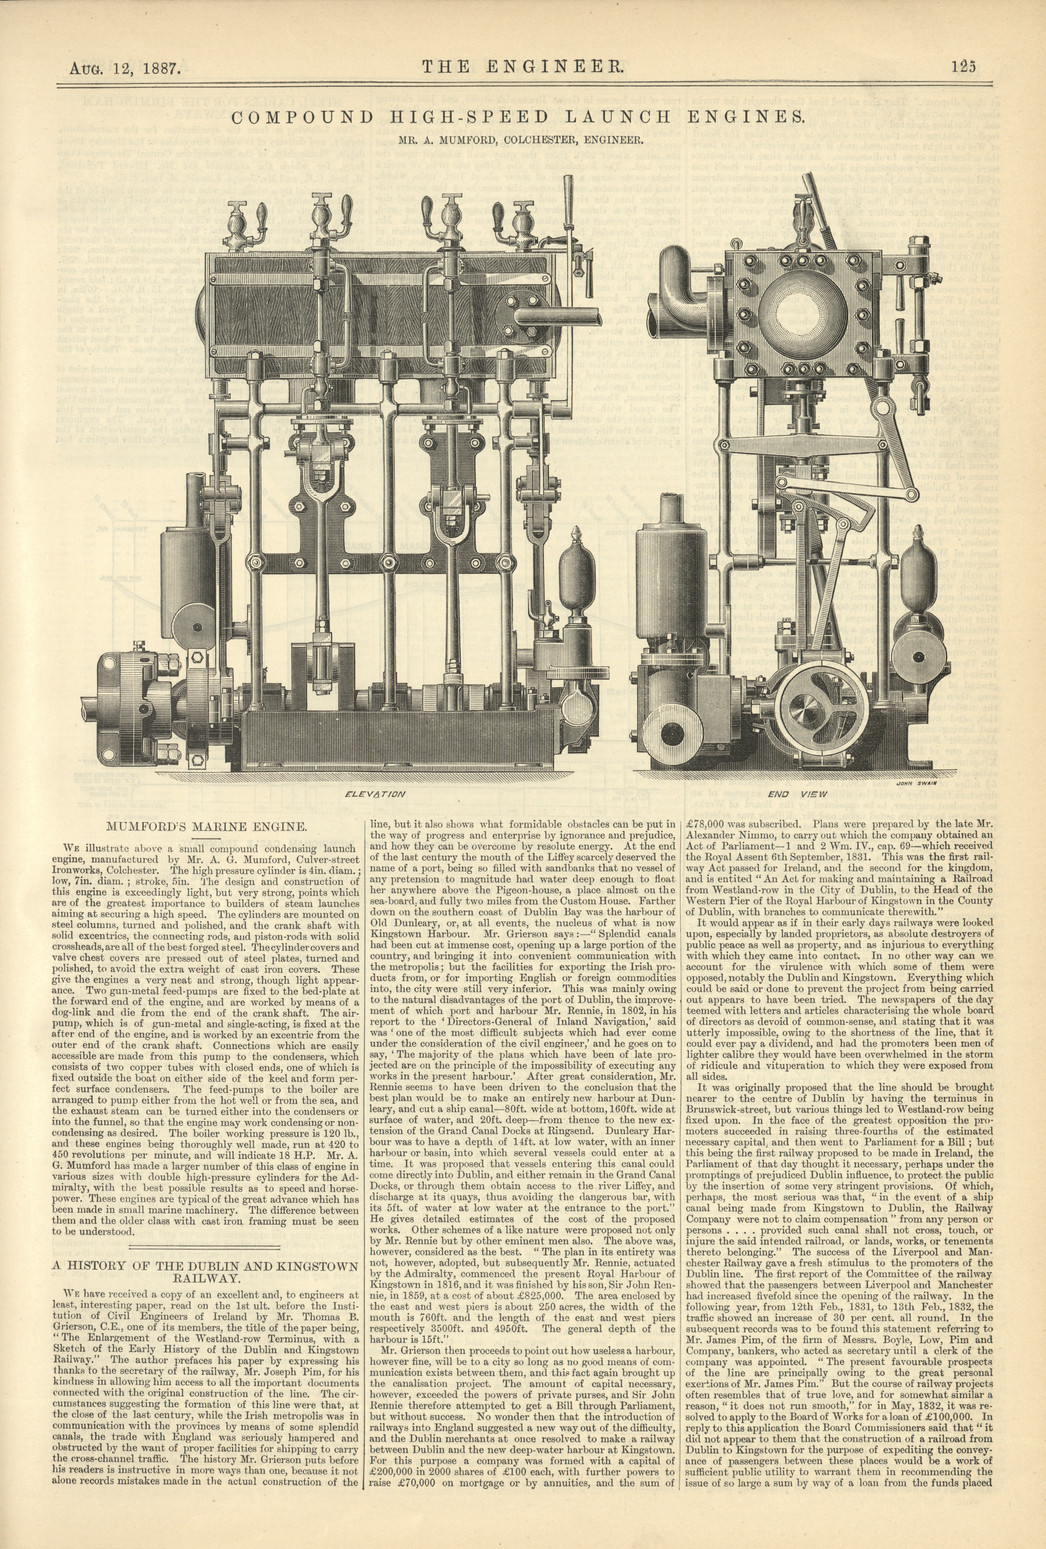 The Engineer, Vol.64, 12 August